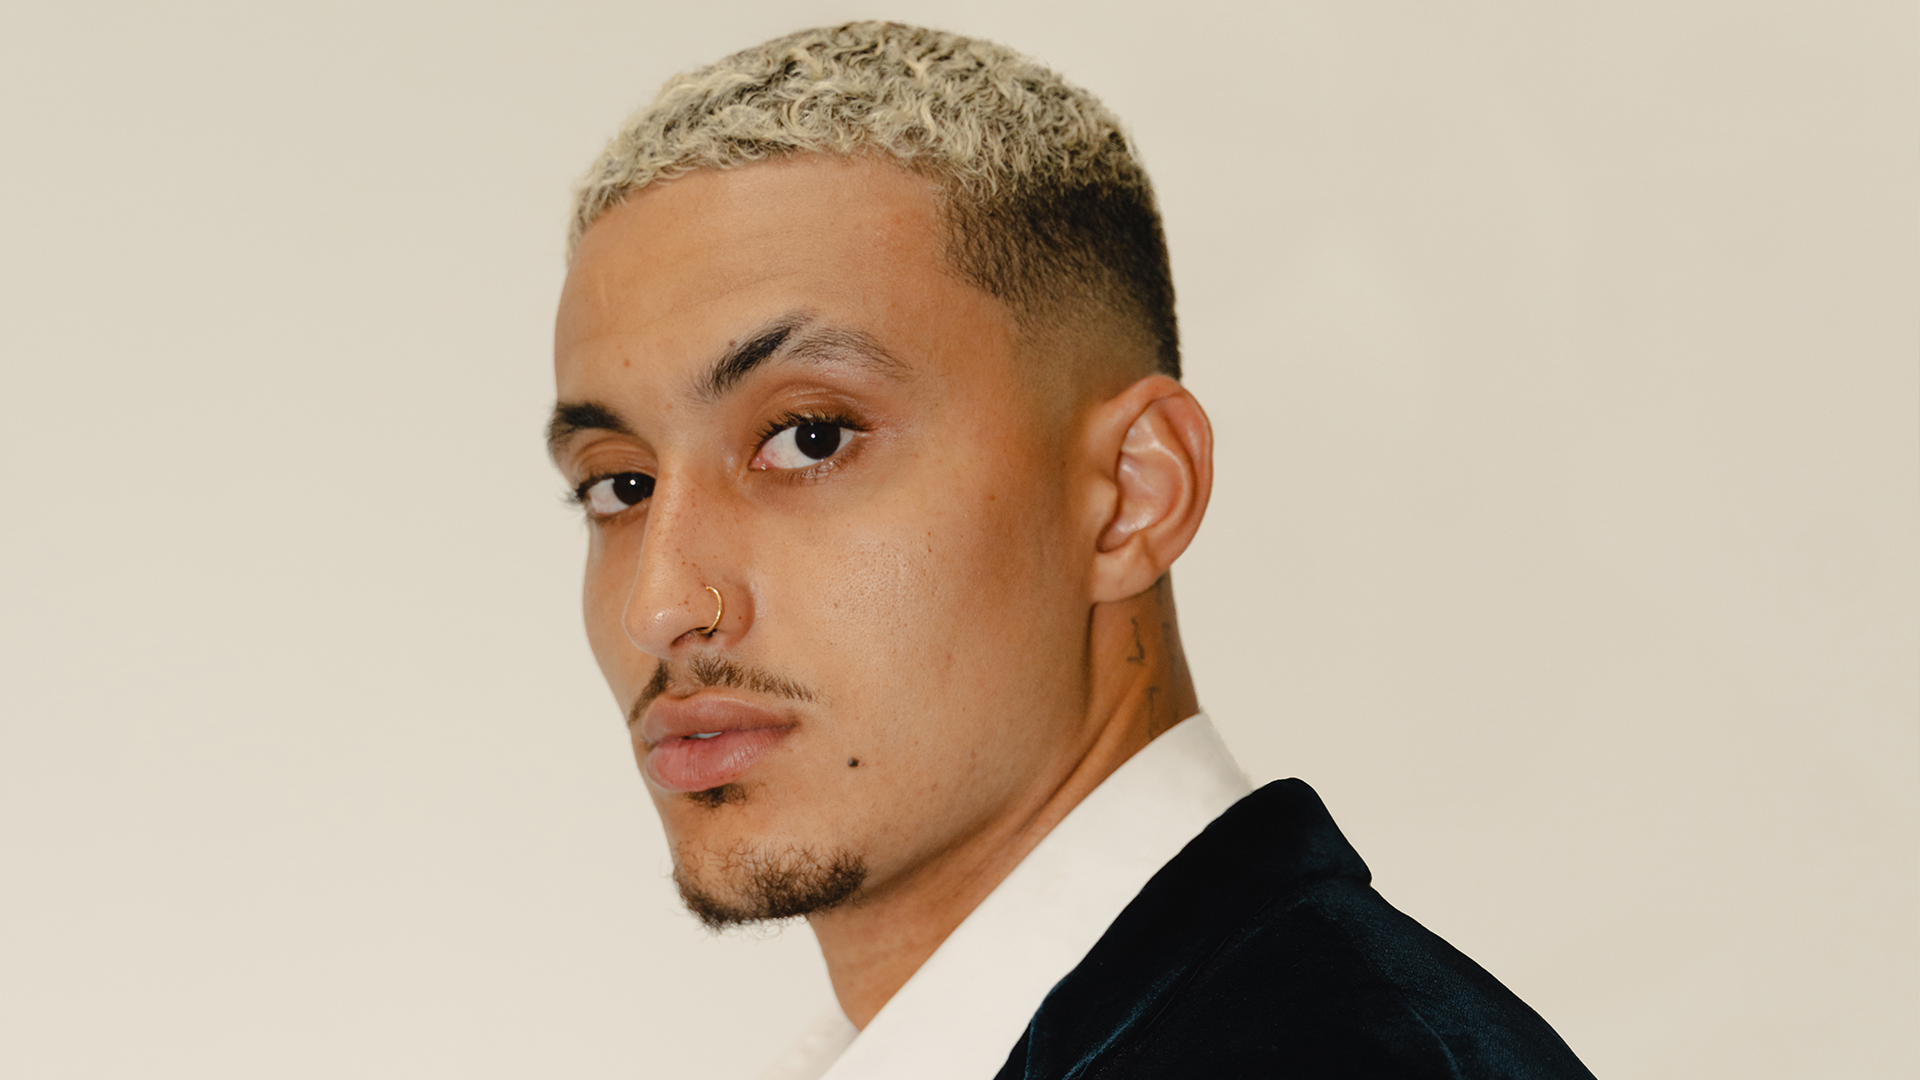 Kyle Kuzma Inks Deal With Mahana Fresh As A Franchisee And Investor, Plans To Develop 35 Stores